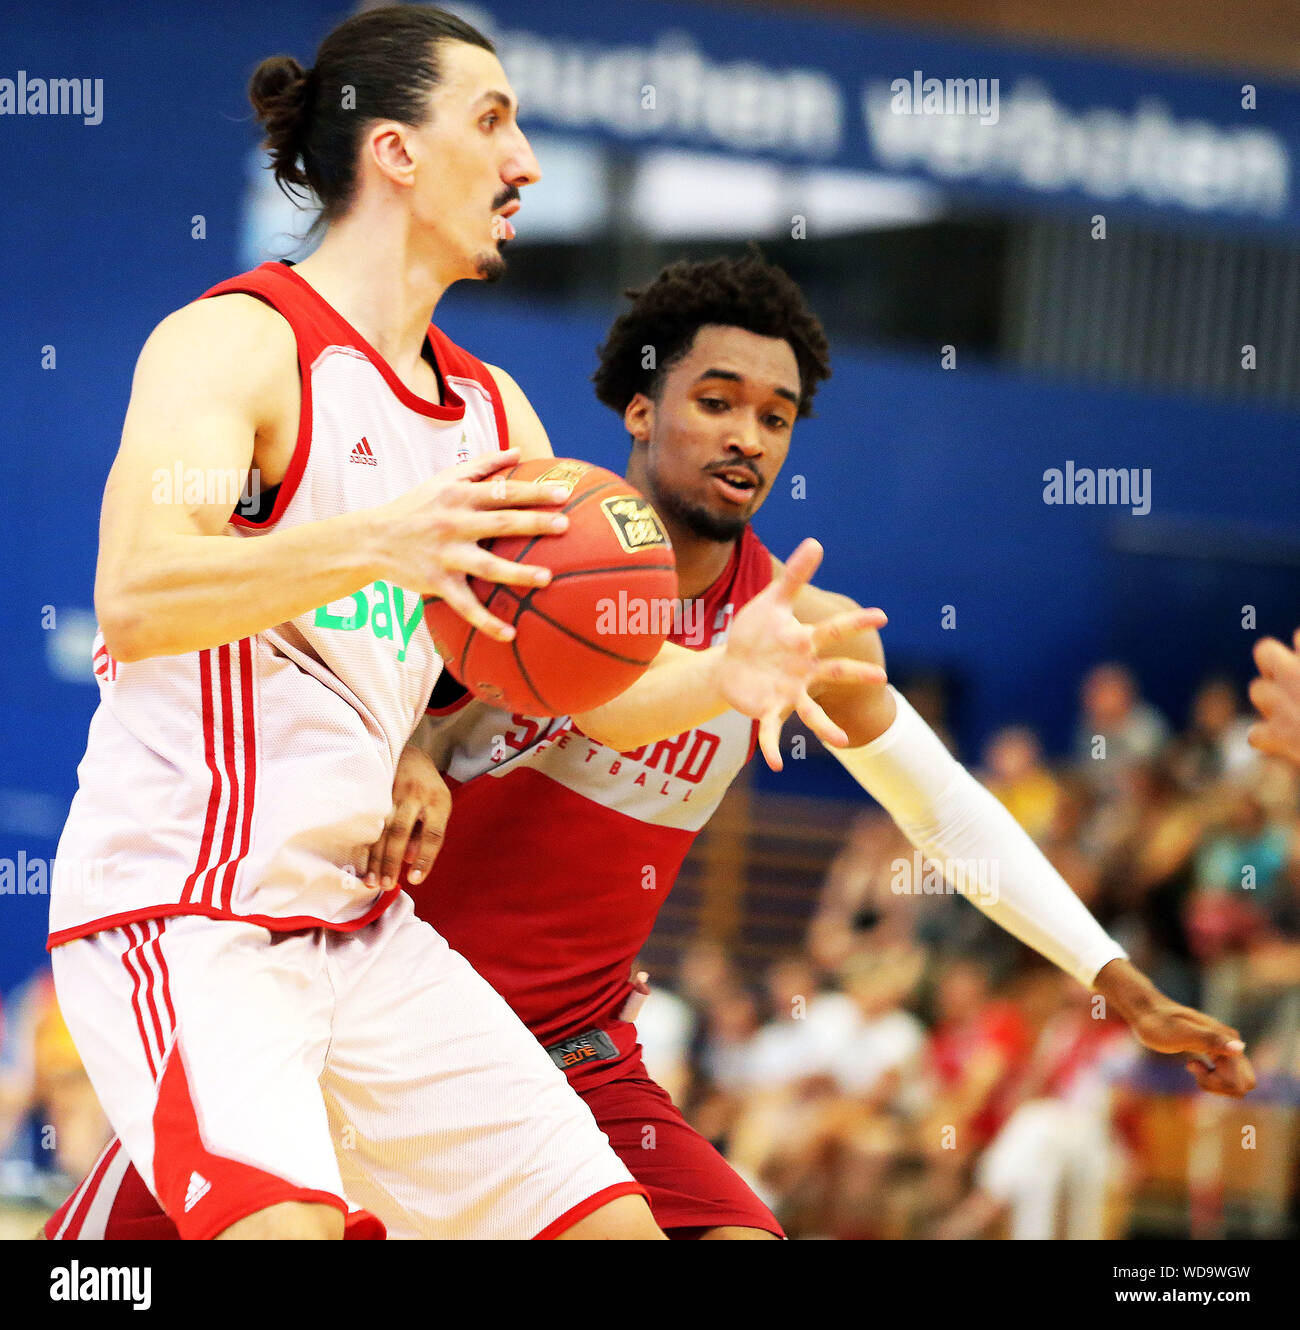 Rosenheim, Germnany. 27th Aug, 2019. from left Nihad DJEDOVIC  (Muenchen/BOS), Bryce WILLS (Stanford), .mens Basketball, pre season  friendly, Aug 27, 2019, FC Bayern Muenchen Basketball vs Stanford  University, Rosenheim, Gabor Hall, as